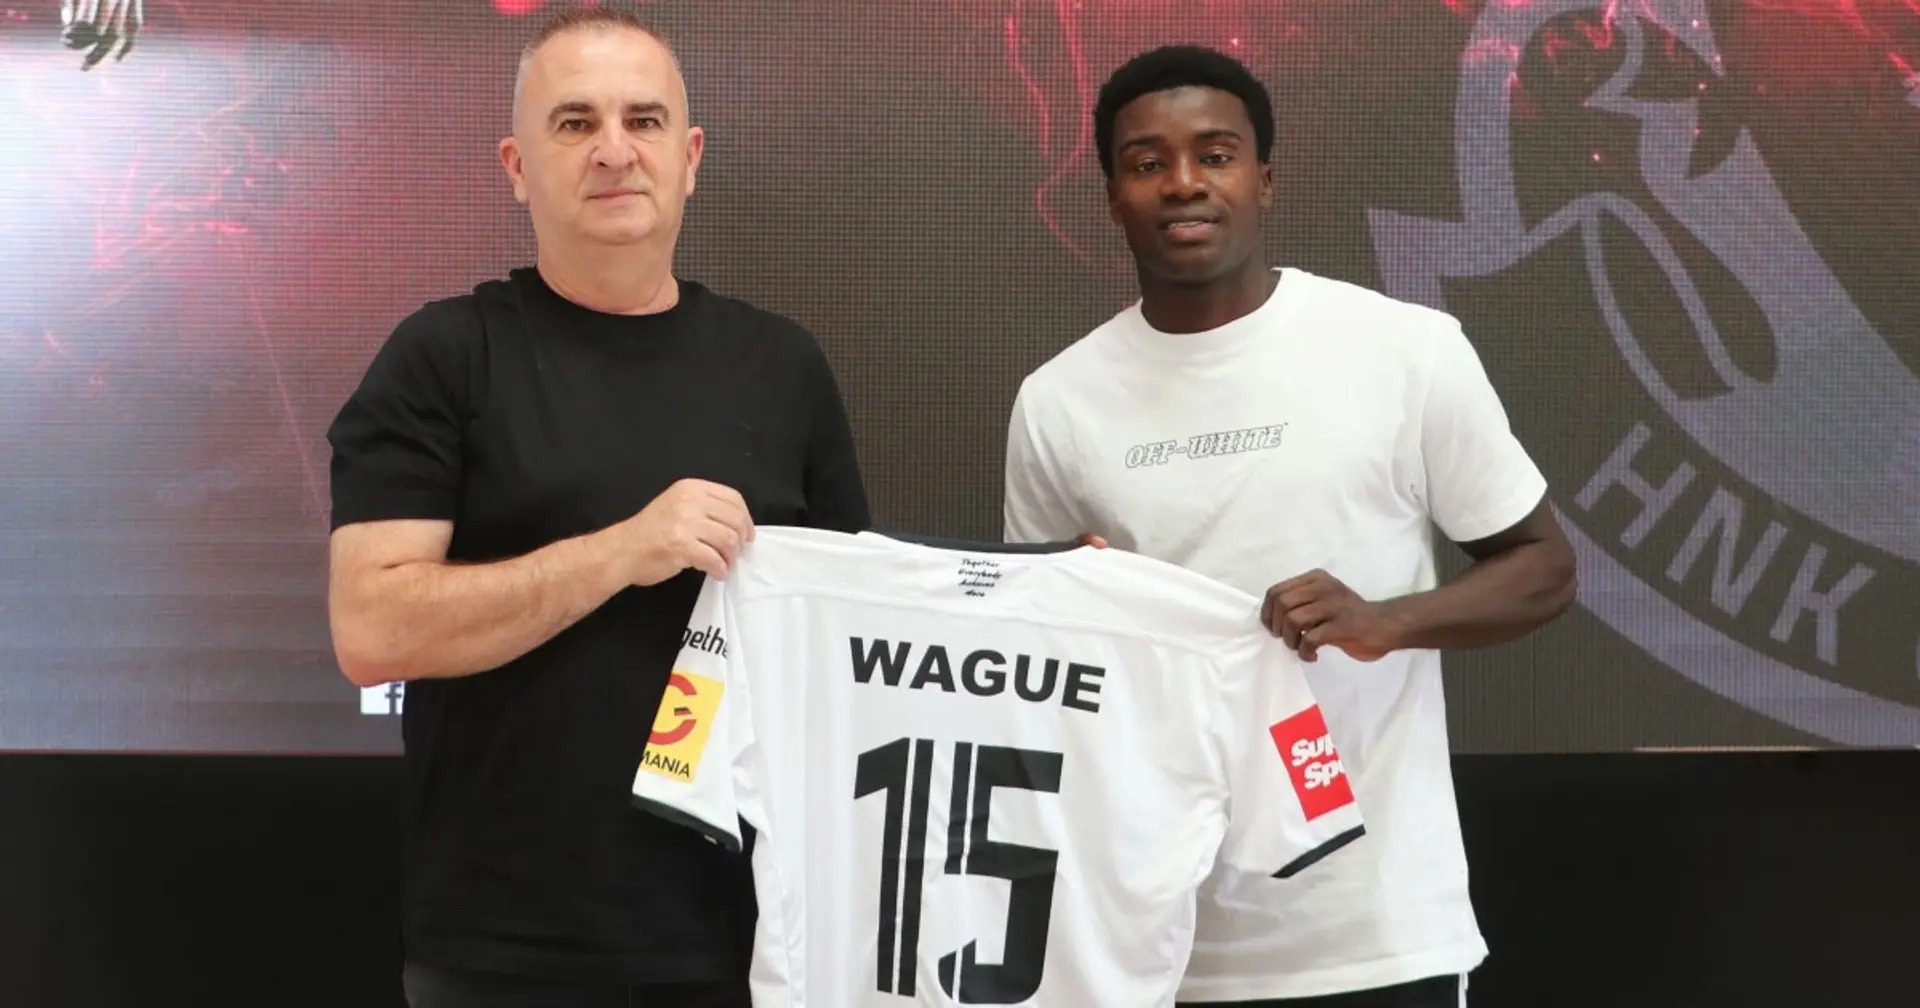 One of the most promising defenders in the world back then, Barca signed Wague for €5m in 2018 and sent him to the reserves.  In 2020, while on loan at PAOK, the Senegalese suffered a serious injury that kept him on the sidelines for over a year. Moussa returned to training in January 2022. His last official game was two years ago.  Source: HNK Gorica @ Twitter